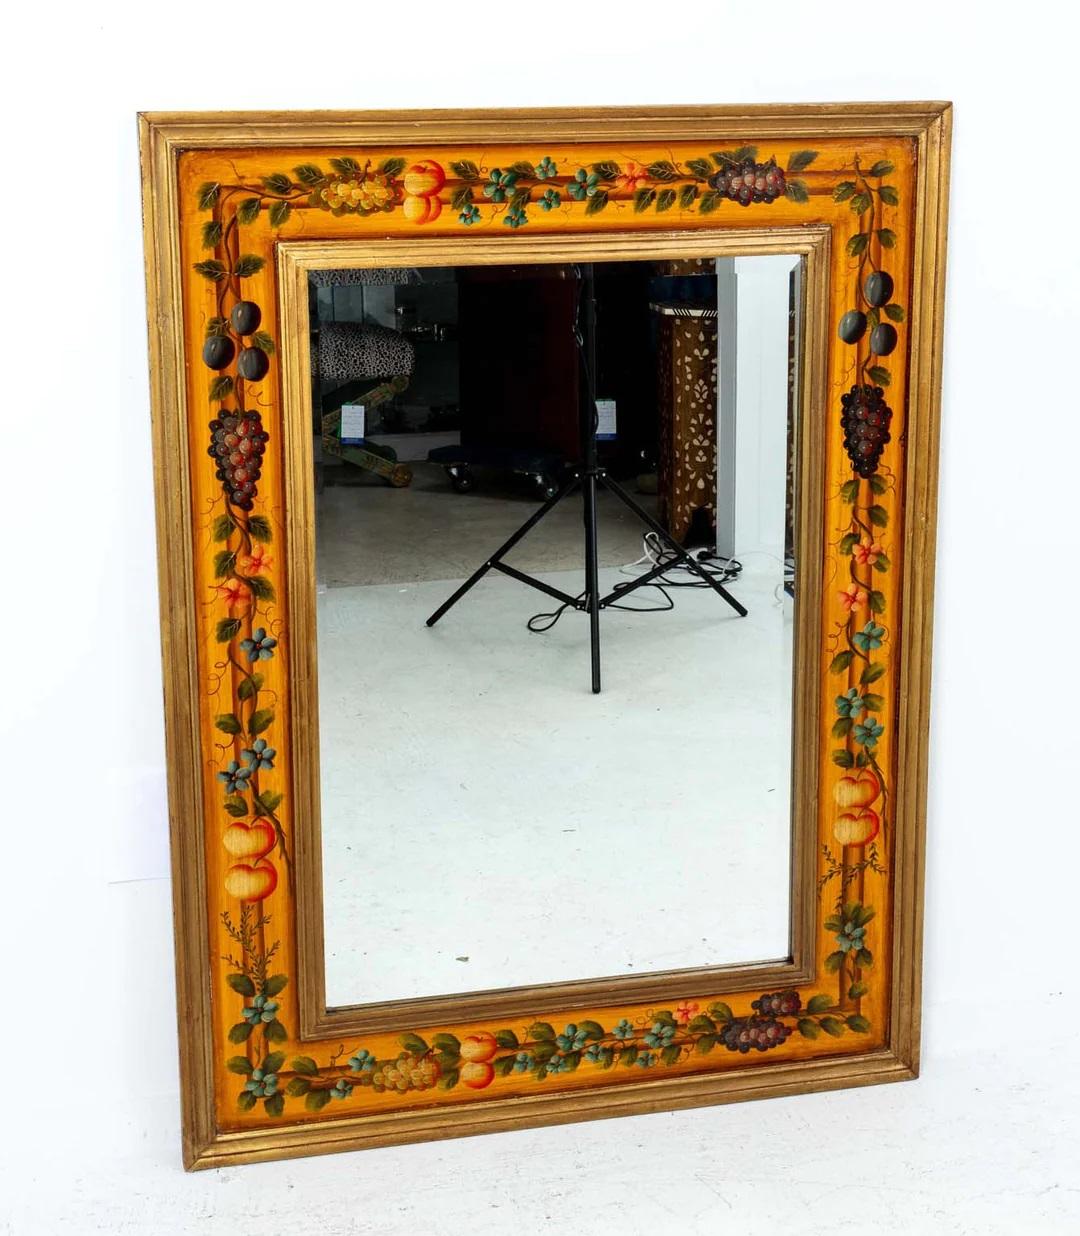 Beveled Fruit Motif Mirror. Can be hung both vertical or horizontal from wires on back. Good overall condition.